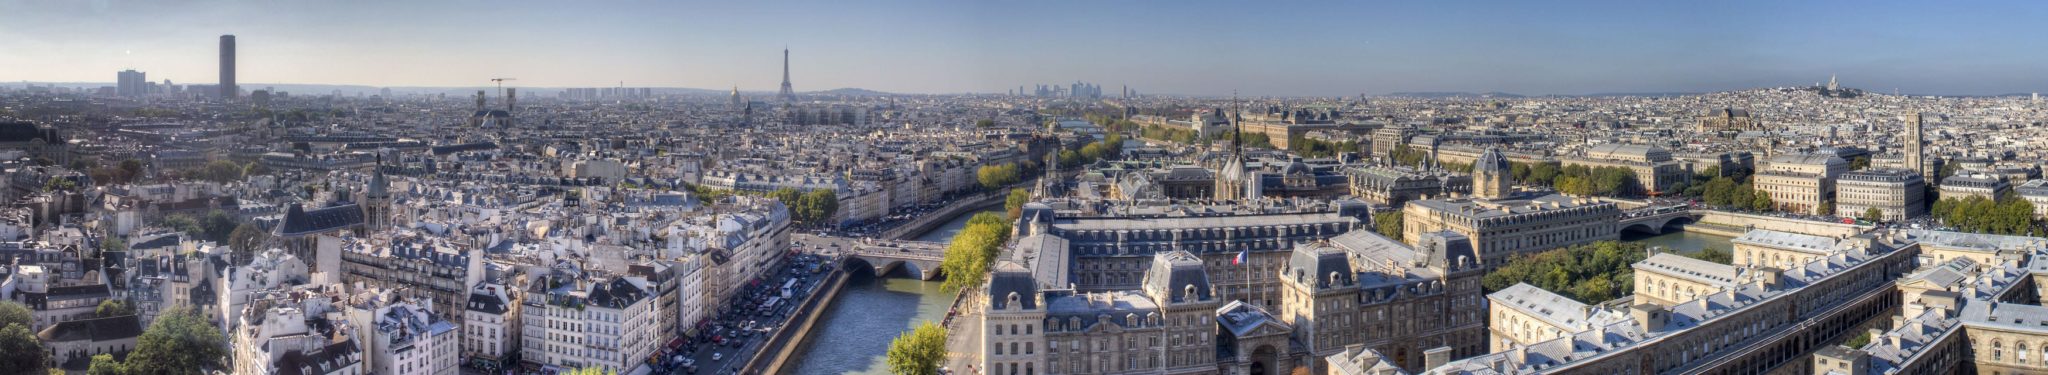 Nine Paris travel tips for luxury travellers to the City of Light | Pic ollografik